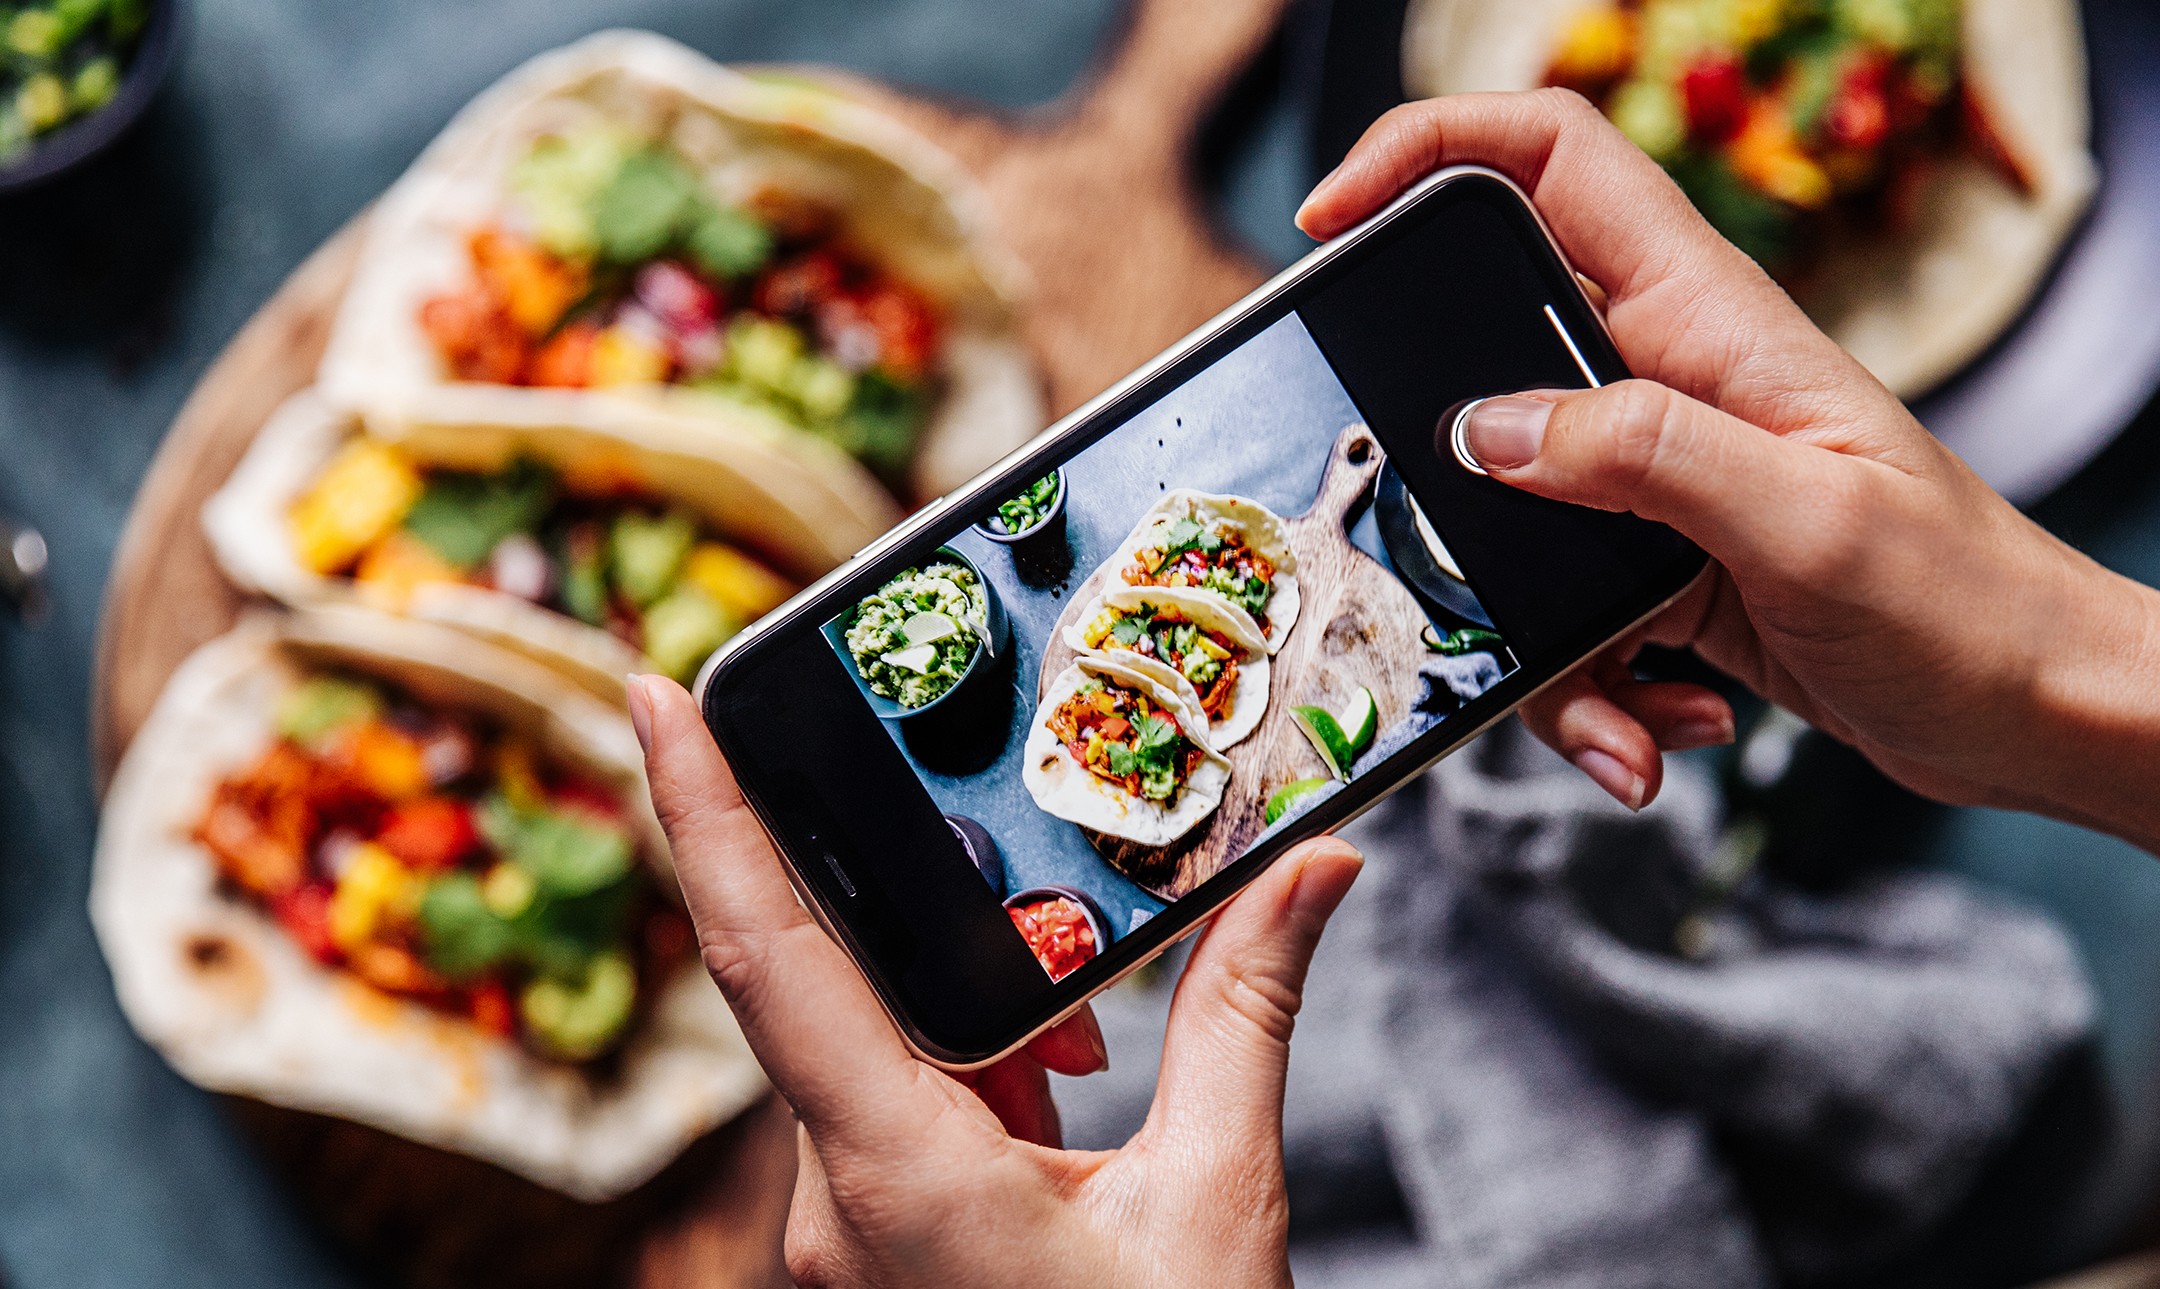 Hand of a chef taking photograph of tacos on table with a mobile phone. Hands of cook photographing Mexican food